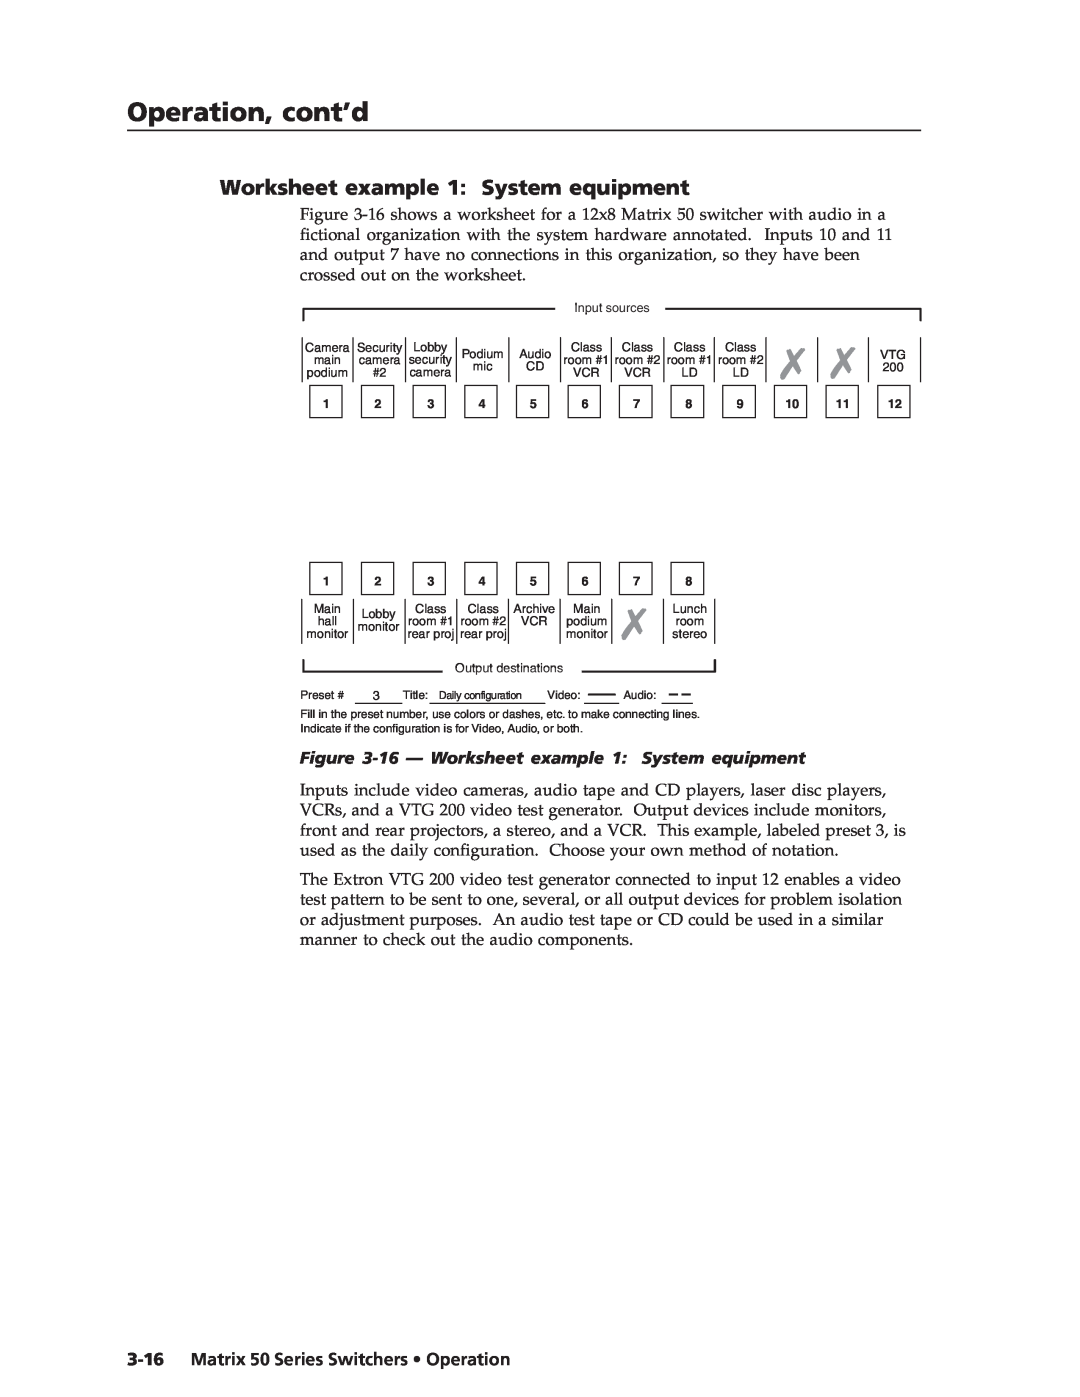 Extron electronic manual 16 - Worksheet example 1 System equipment, Matrix 50 Series Switchers Operation 